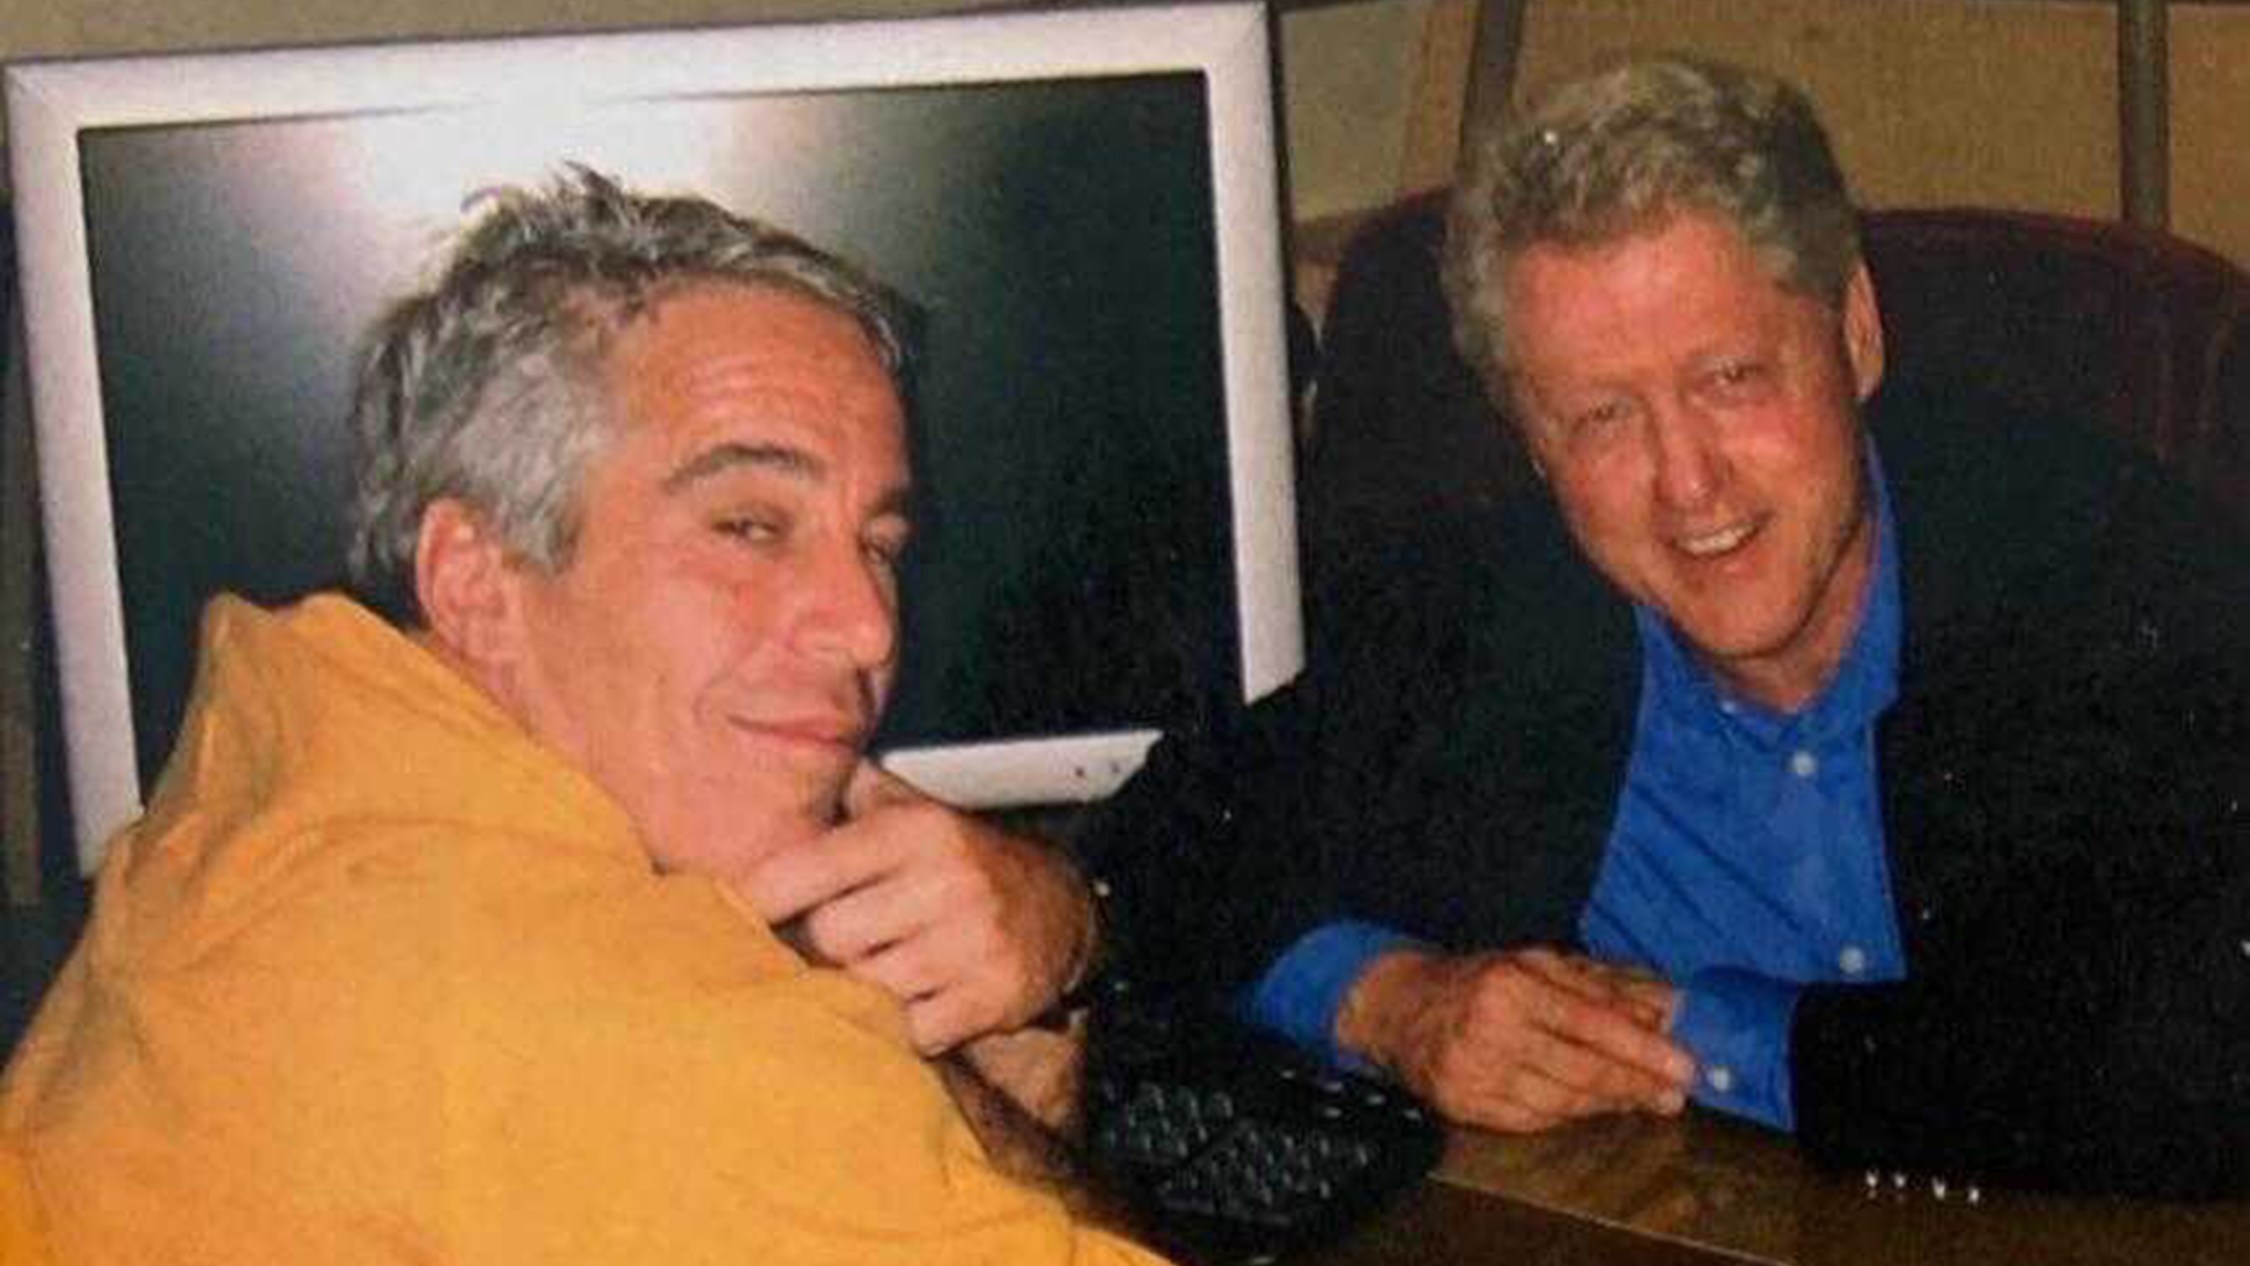 The Revelation of ‘Doe 36’: Unveiling Bill Clinton’s Involvement in the Jeffrey Epstein Case